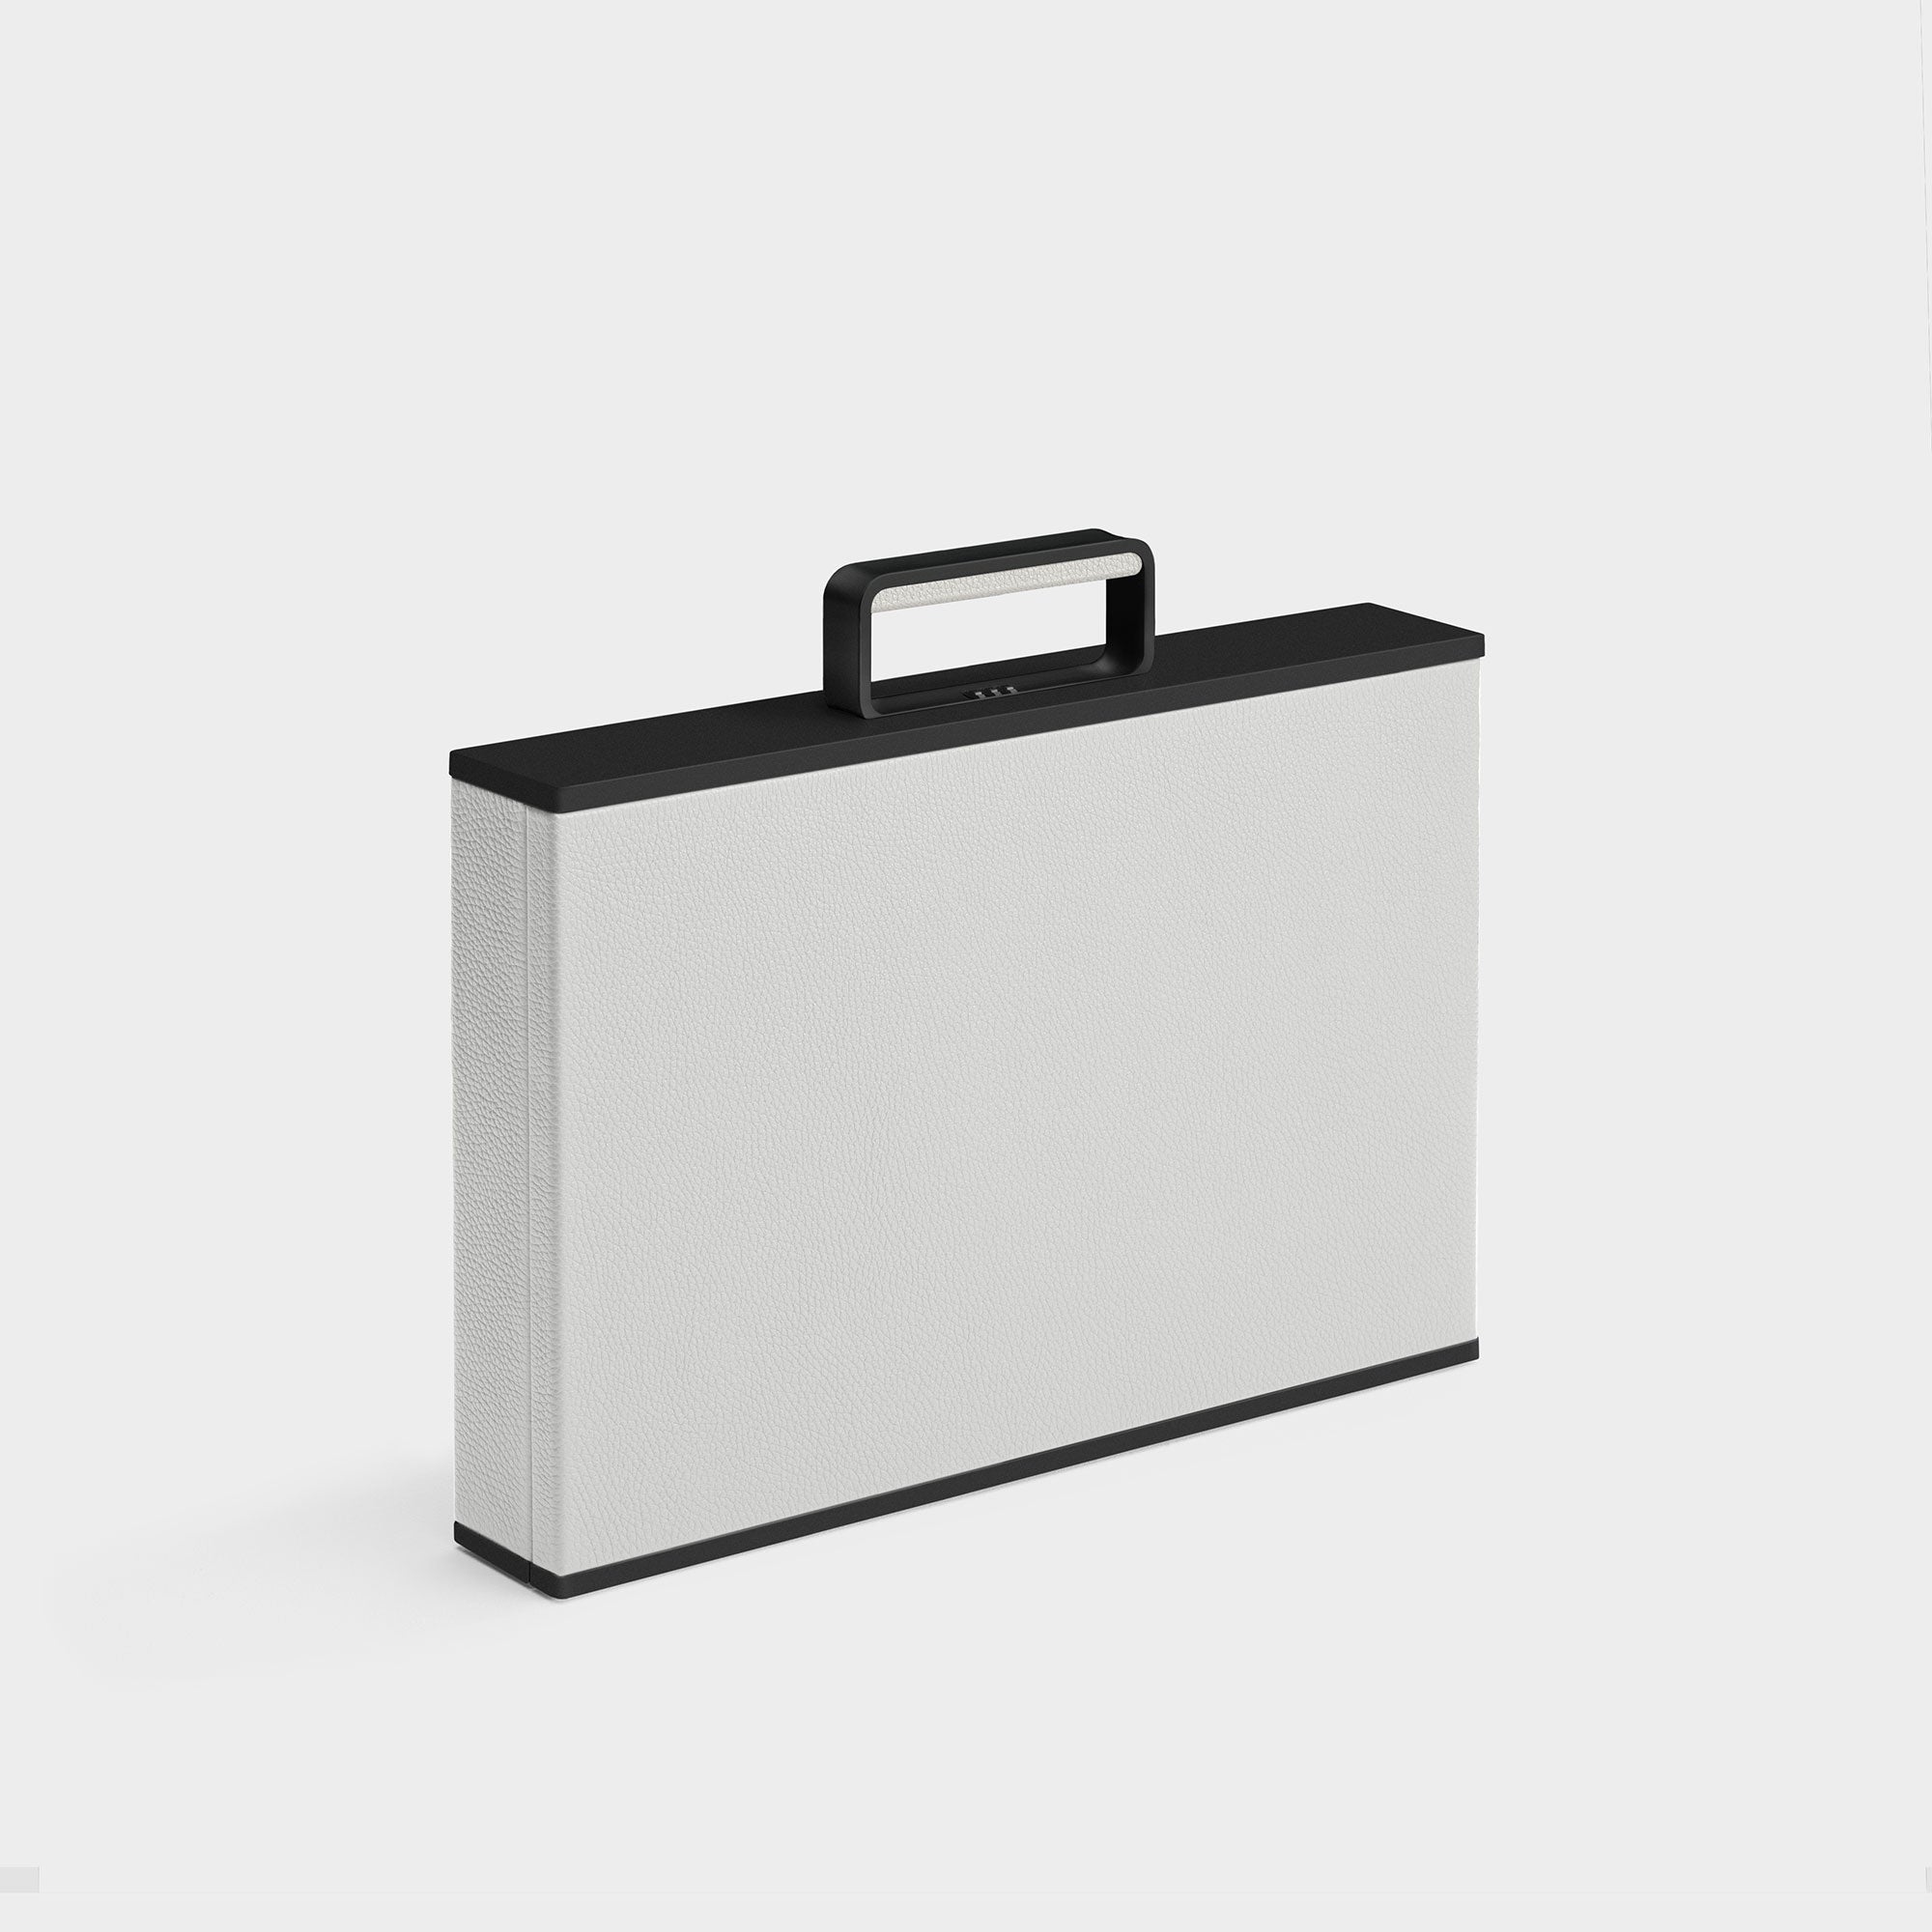 Luxury designer watch briefcase for up to 10 watches by Charles Simon. Handmade in Canada from white young bull leather